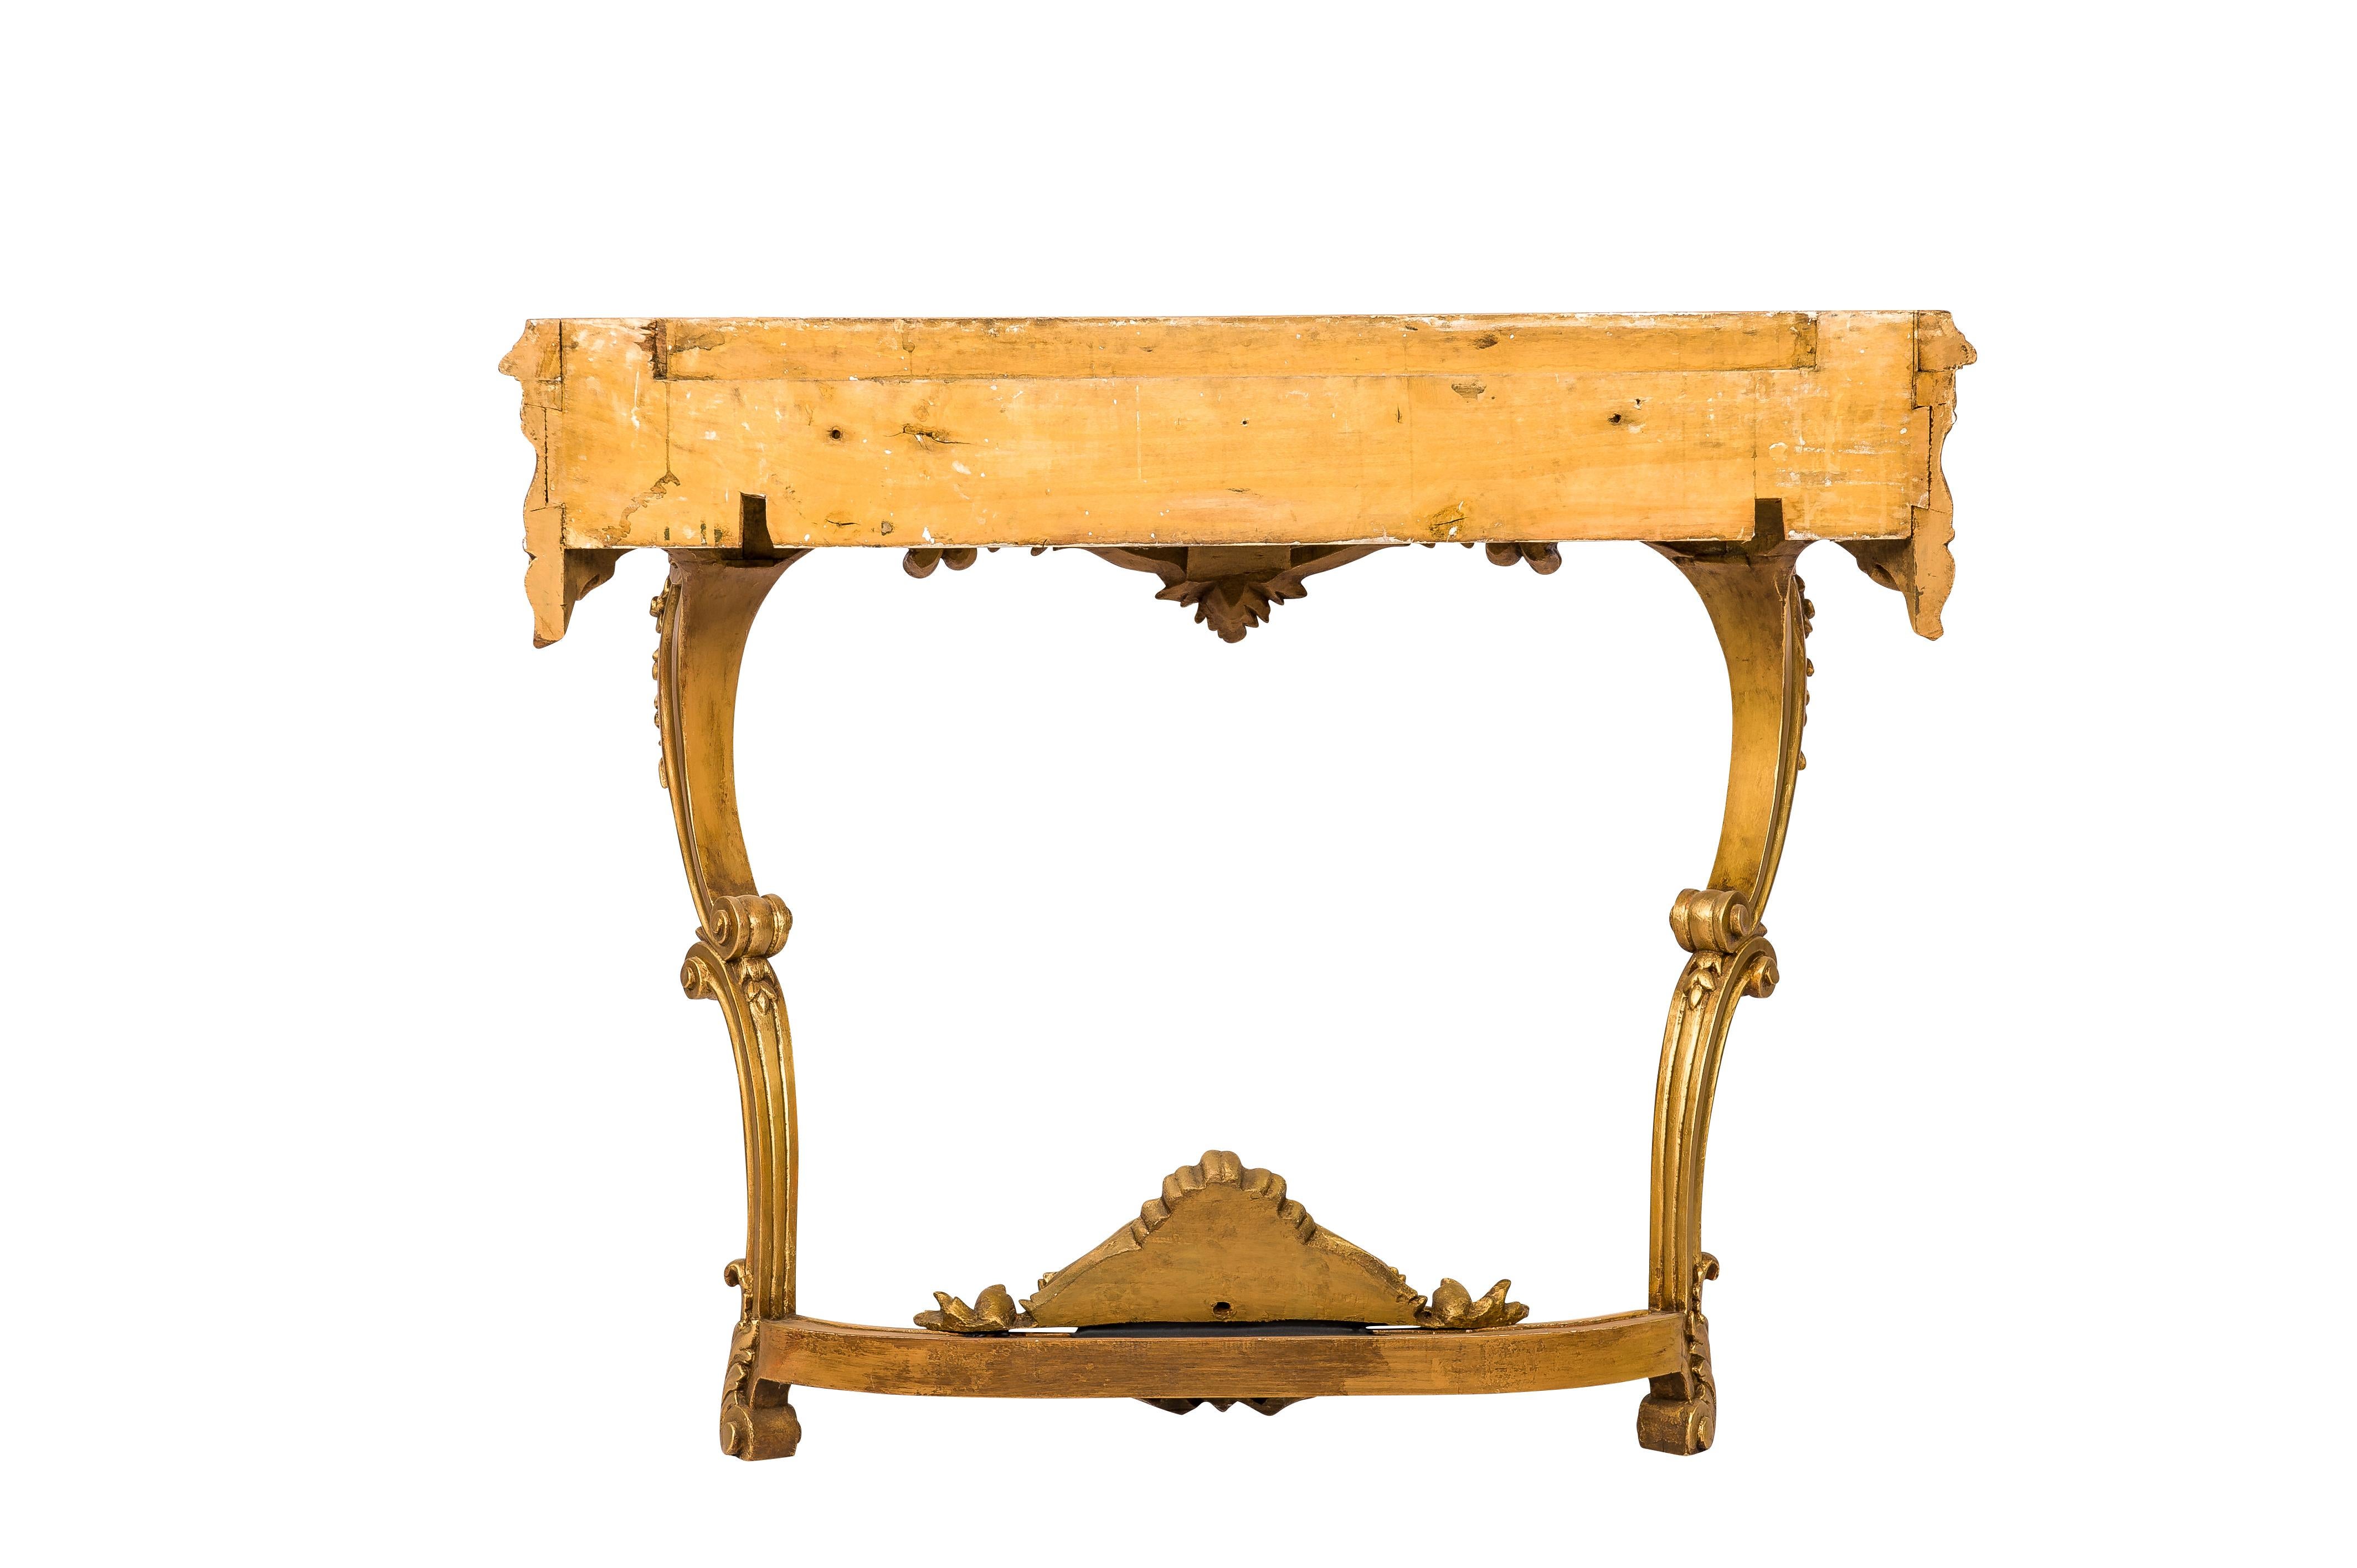 Italian Antique 19th century French Gold Baroque Console Table,  Bianca Rosa Marble Top For Sale